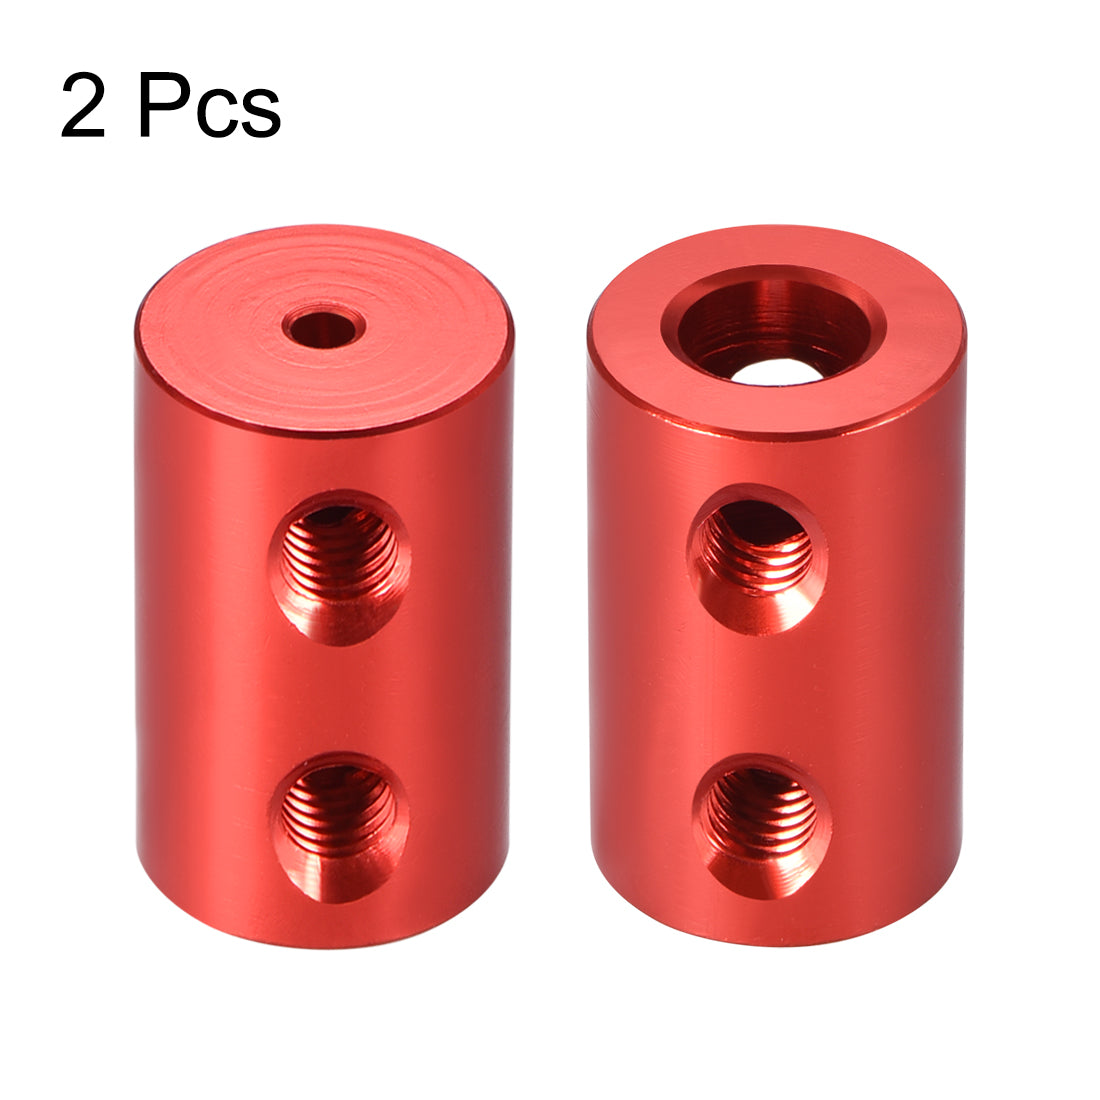 uxcell Uxcell Shaft Coupling 2mm to 6mm Bore L20xD12 Robot Motor Wheel Rigid Coupler Connector Red 2 Pcs